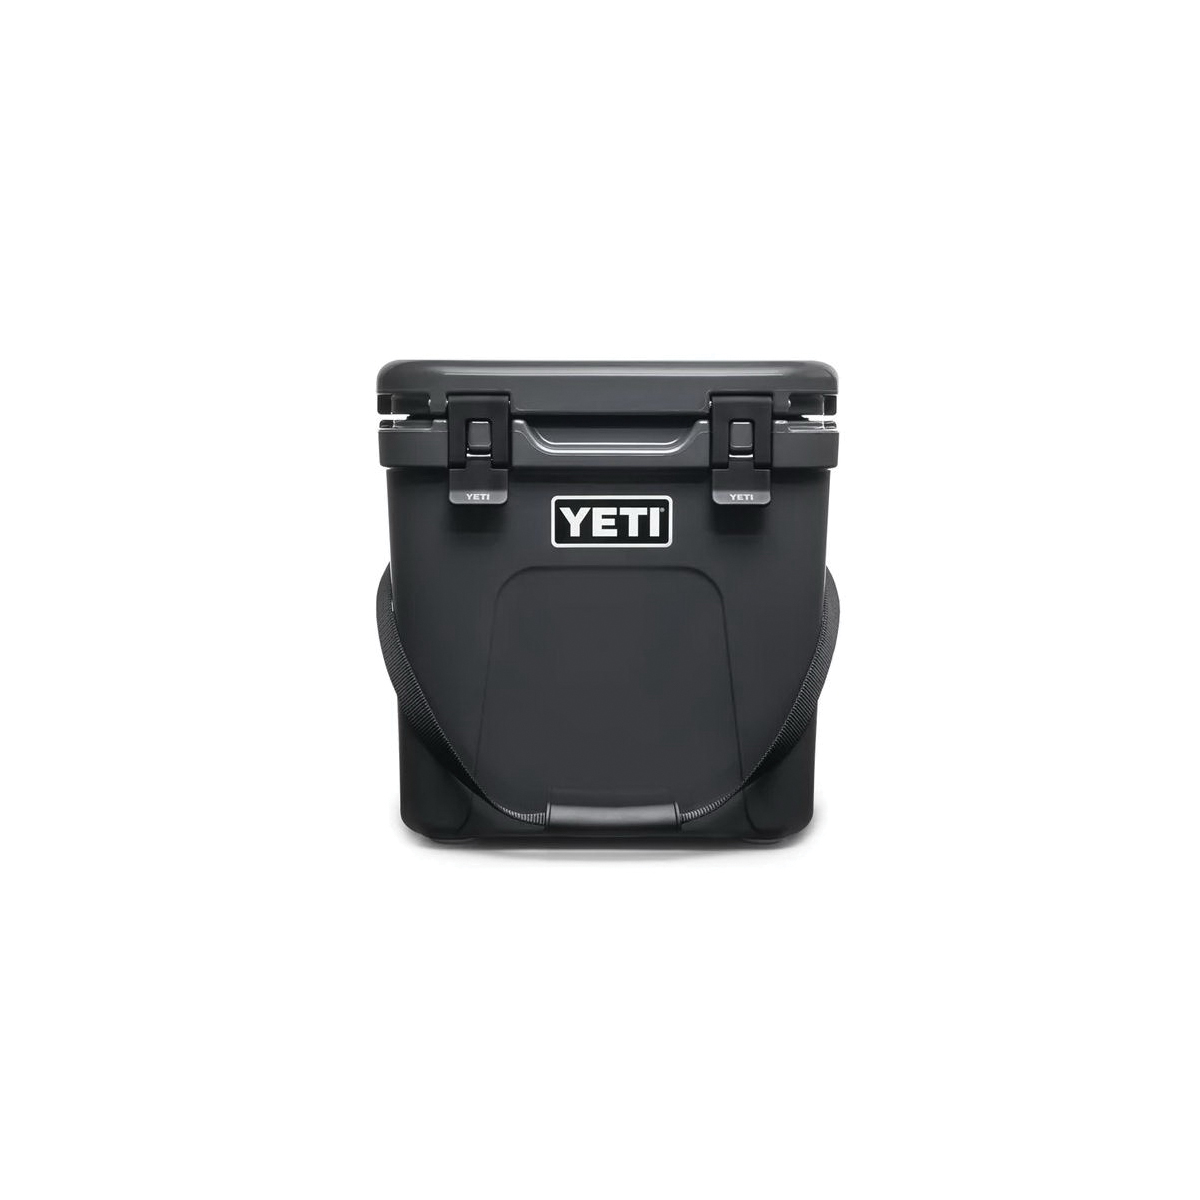 YETI Roadie 24 10022160000 Hard Cooler, 18 Can Cooler, Charcoal - 1